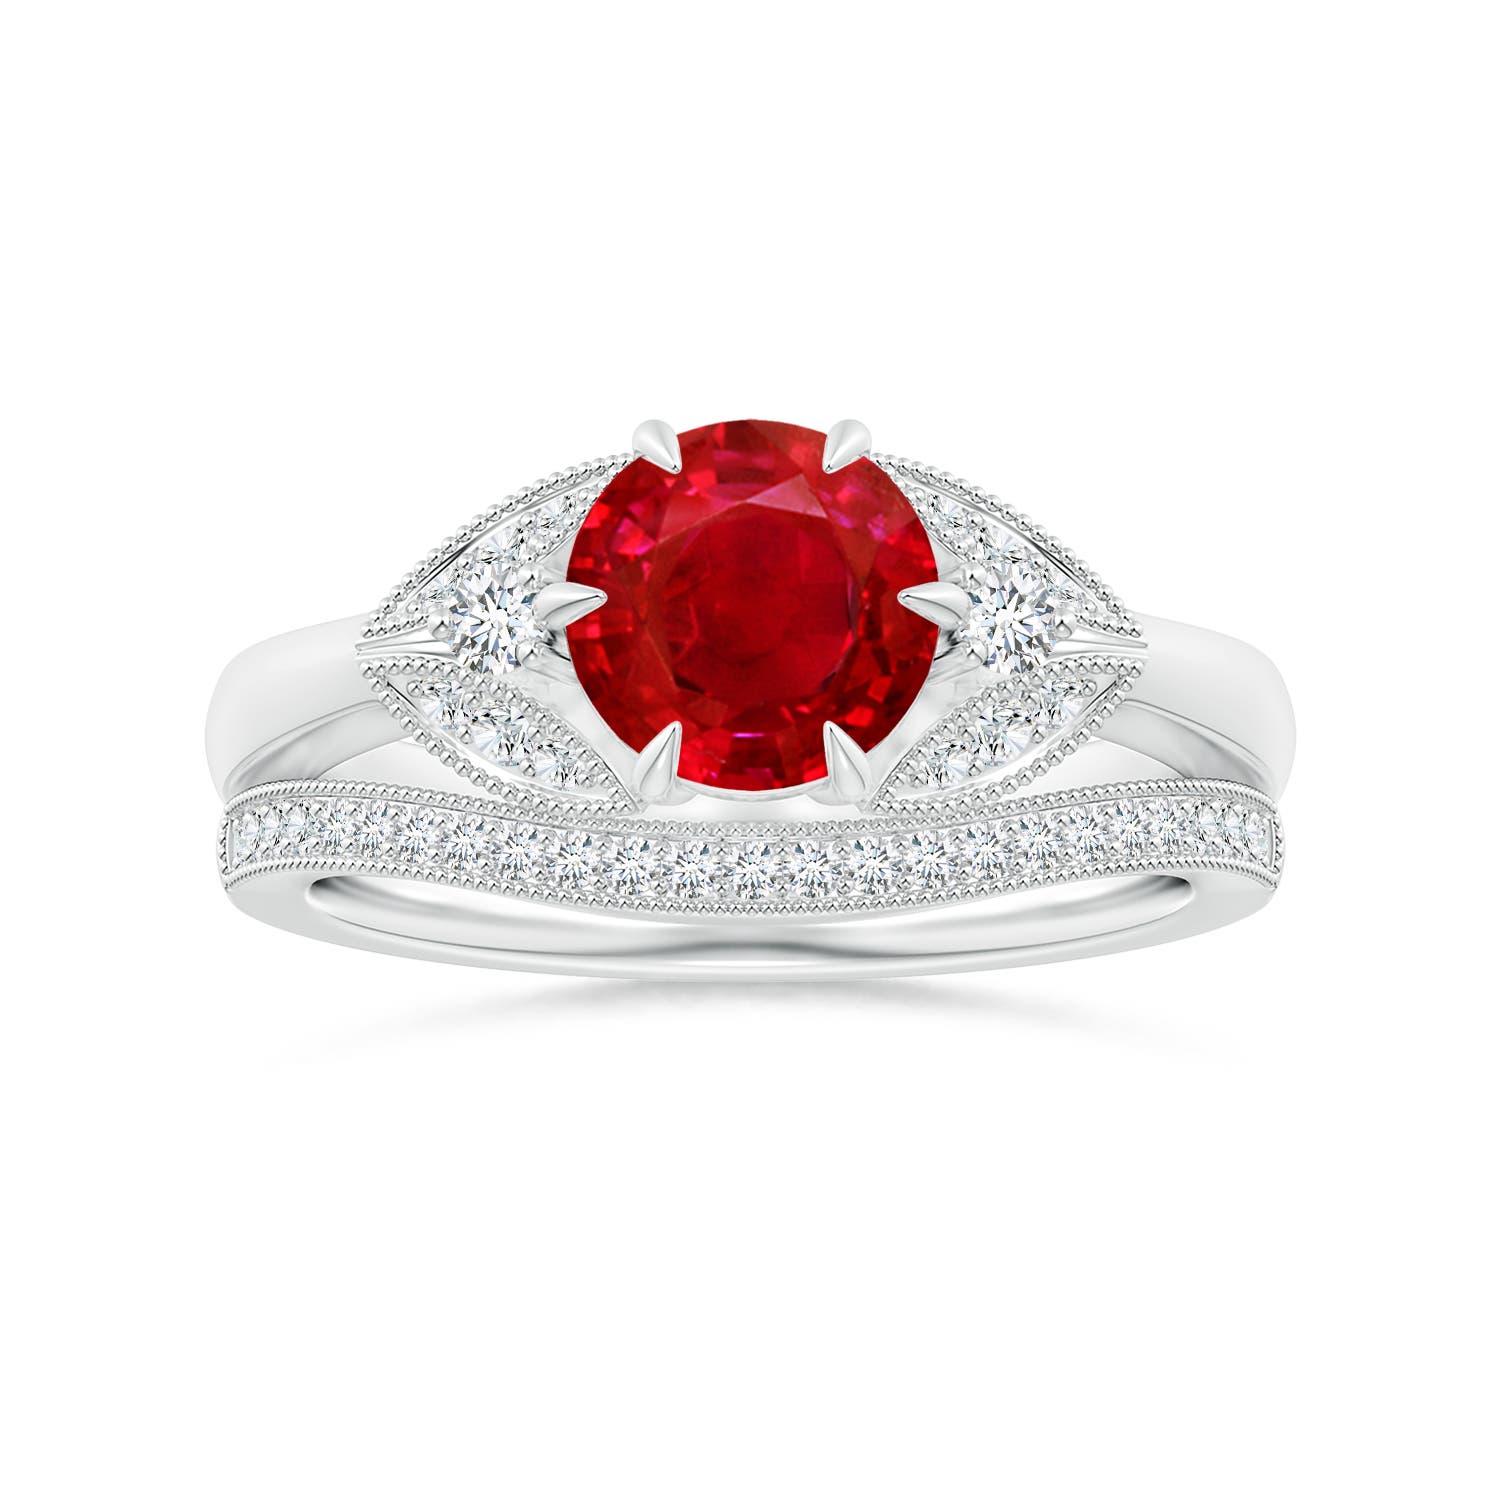 AAA - Ruby / 1.64 CT / 14 KT White Gold